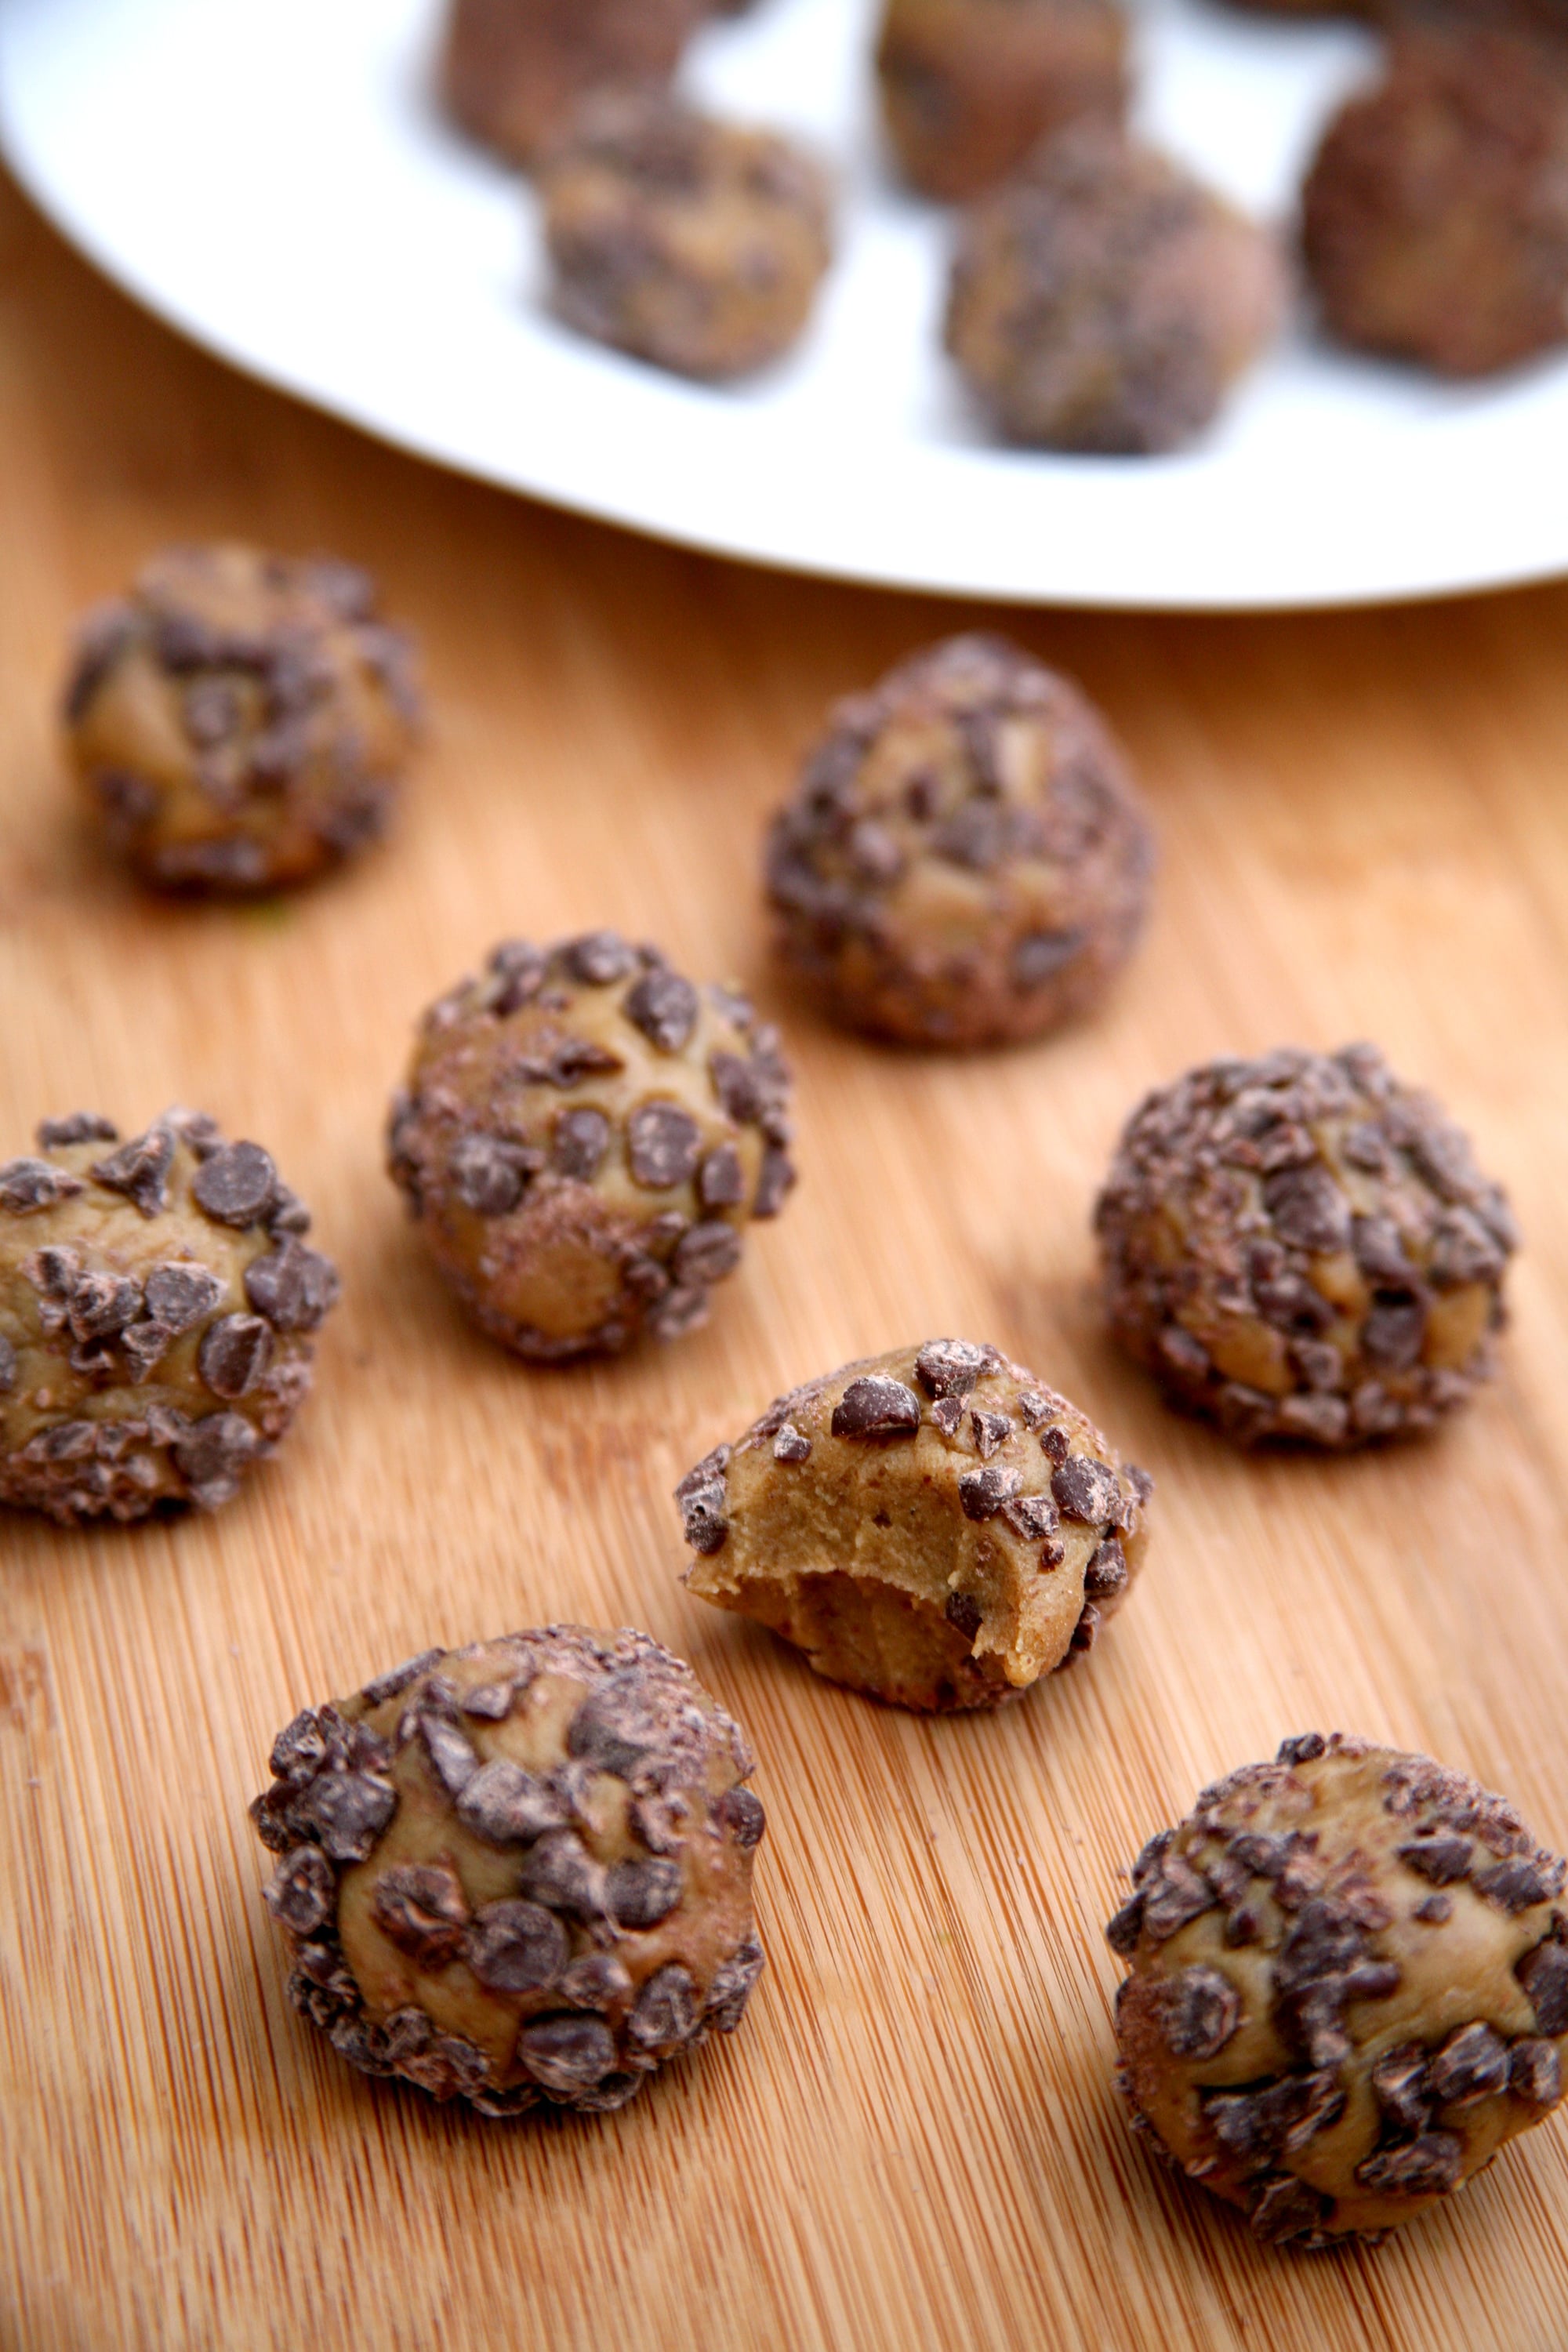 These 5-Ingredient Protein Balls Taste Like a Chocolate Peanut Butter Cup